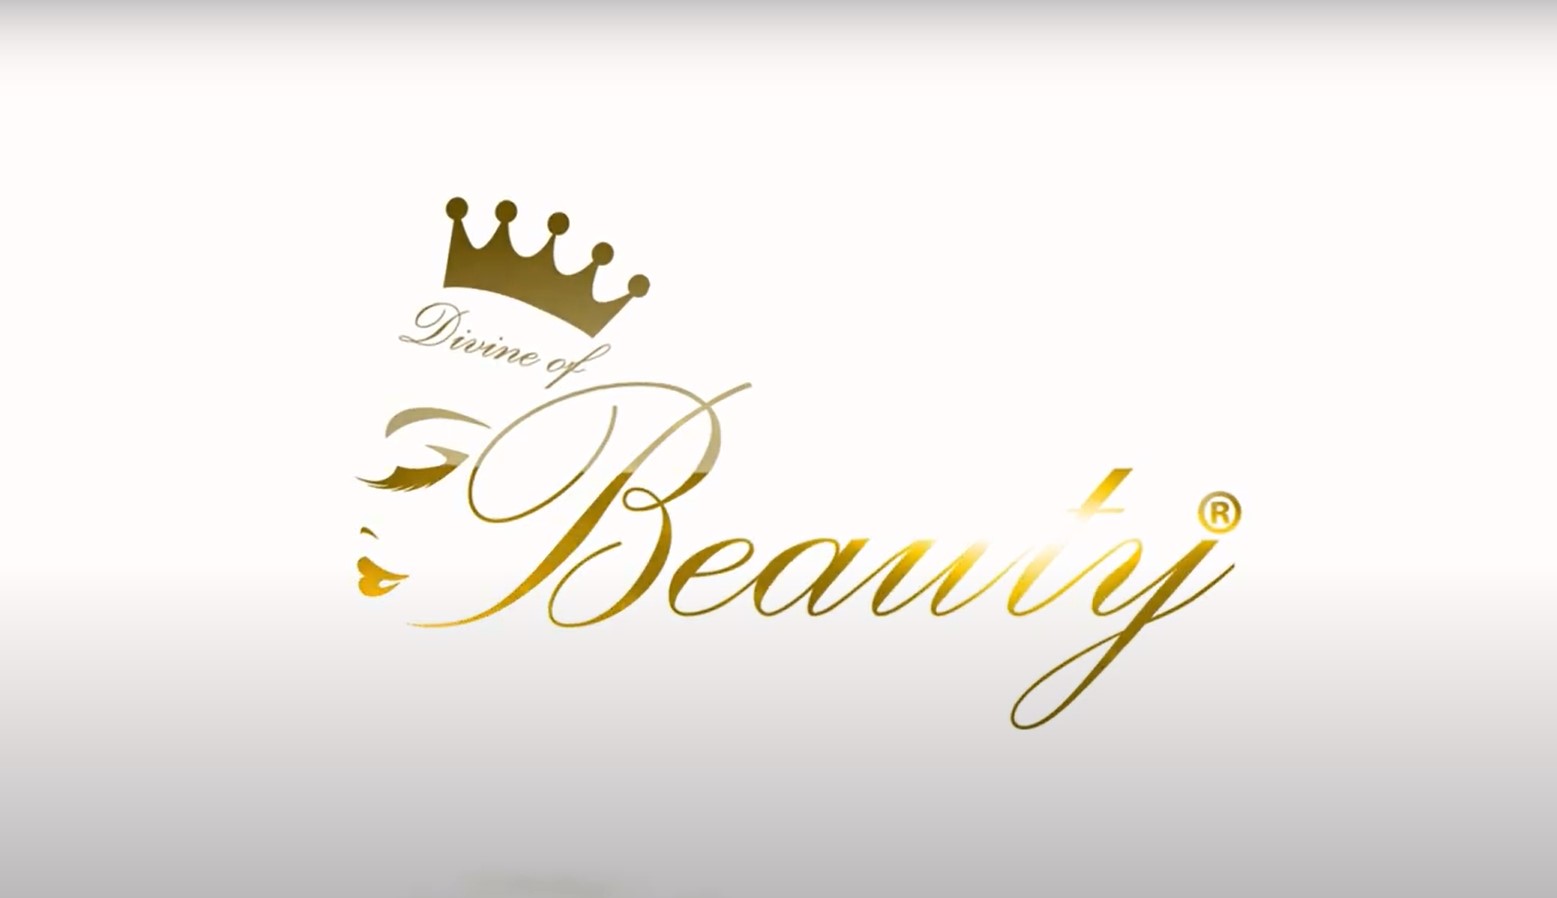 DivineofBeauty Marketing101 Web Design Advertising & SEO Content